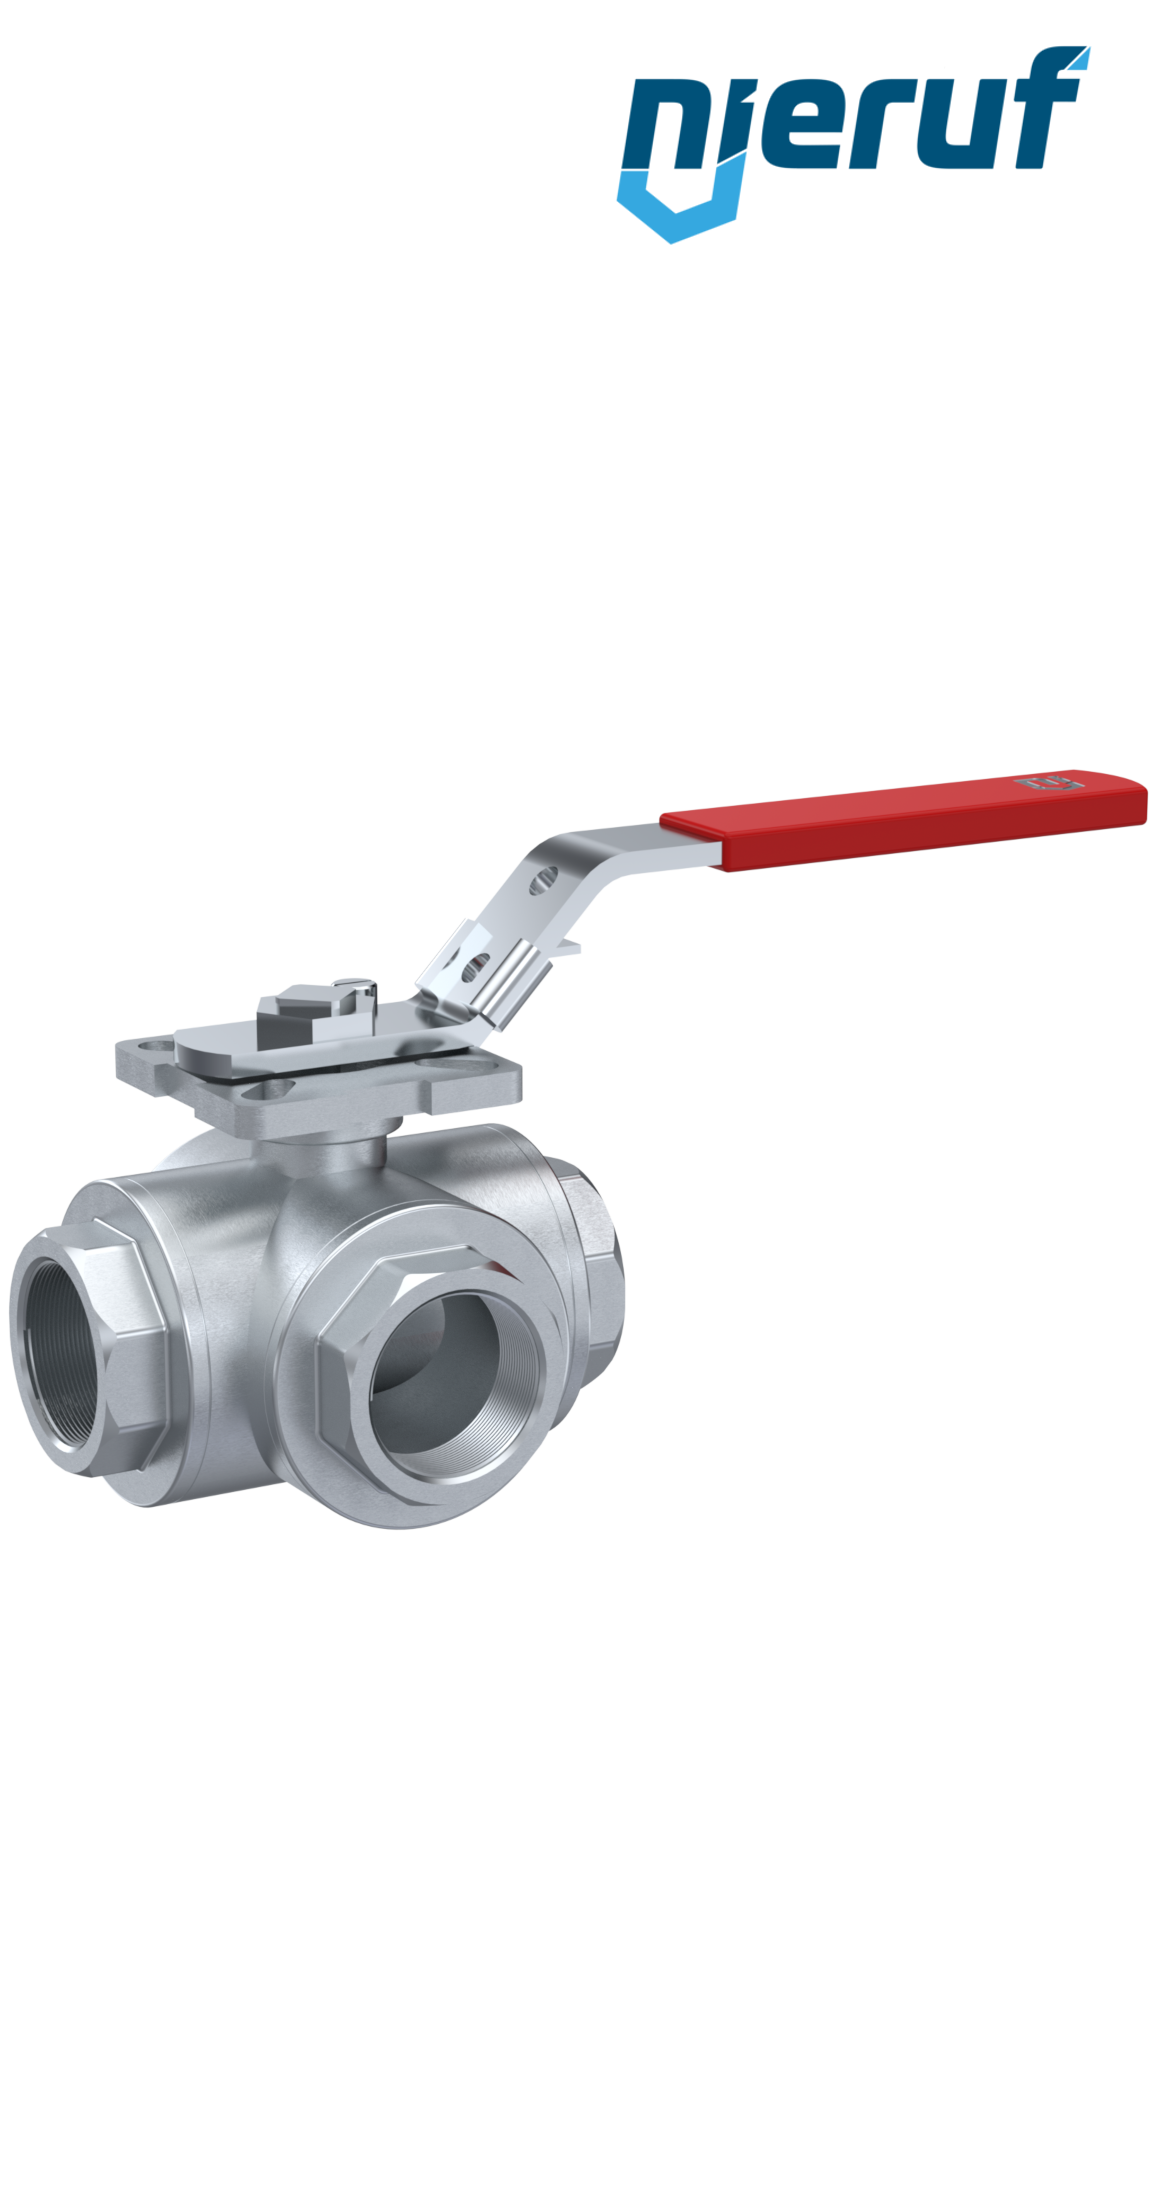 3-way ball valve DN32 - 1 1/4" inch GK09 stainless steel L drilling